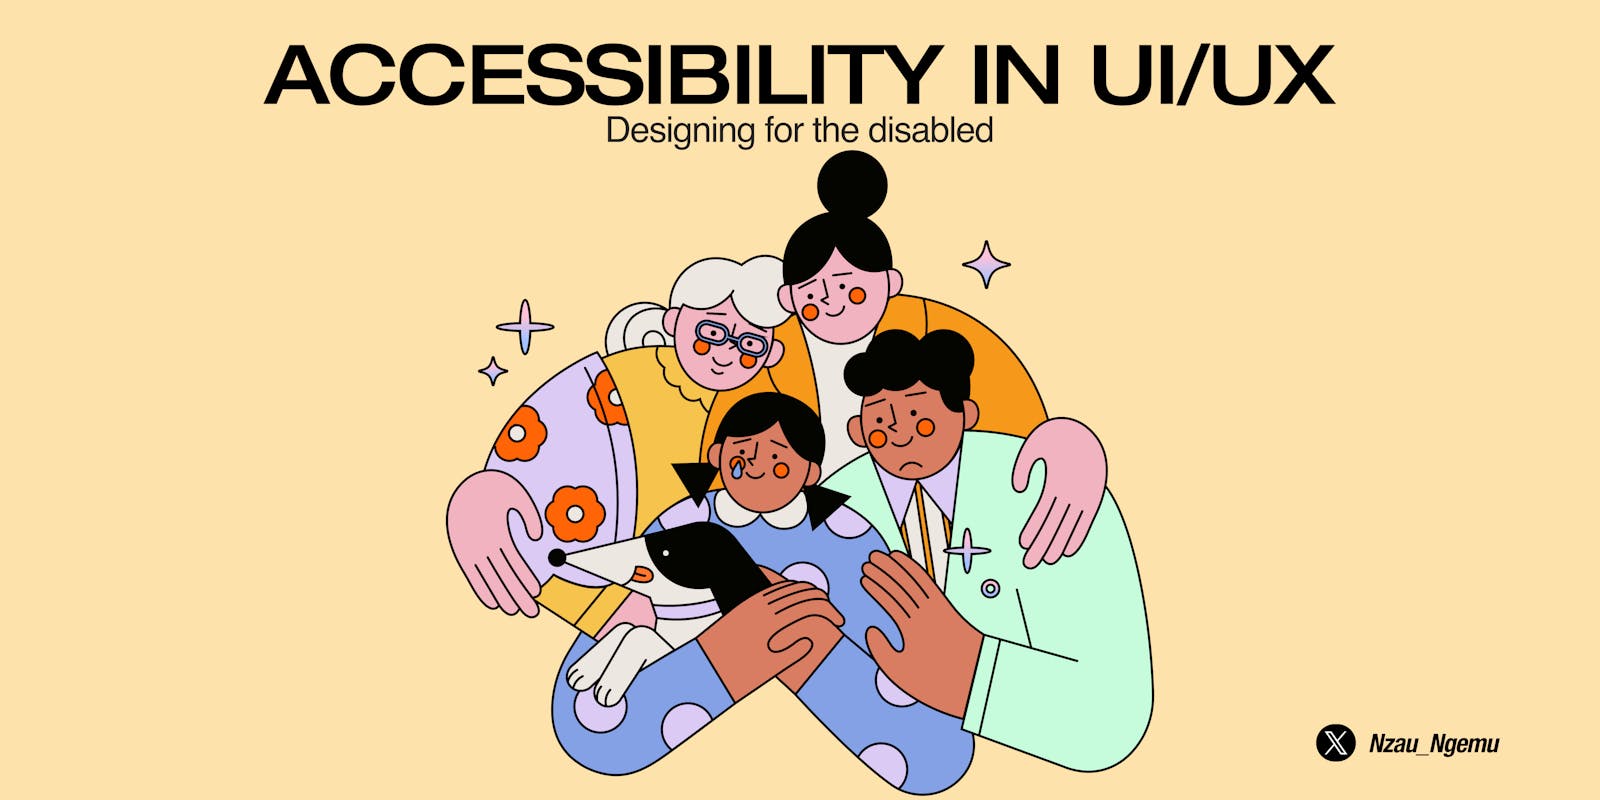 Accessibility in UI/UX